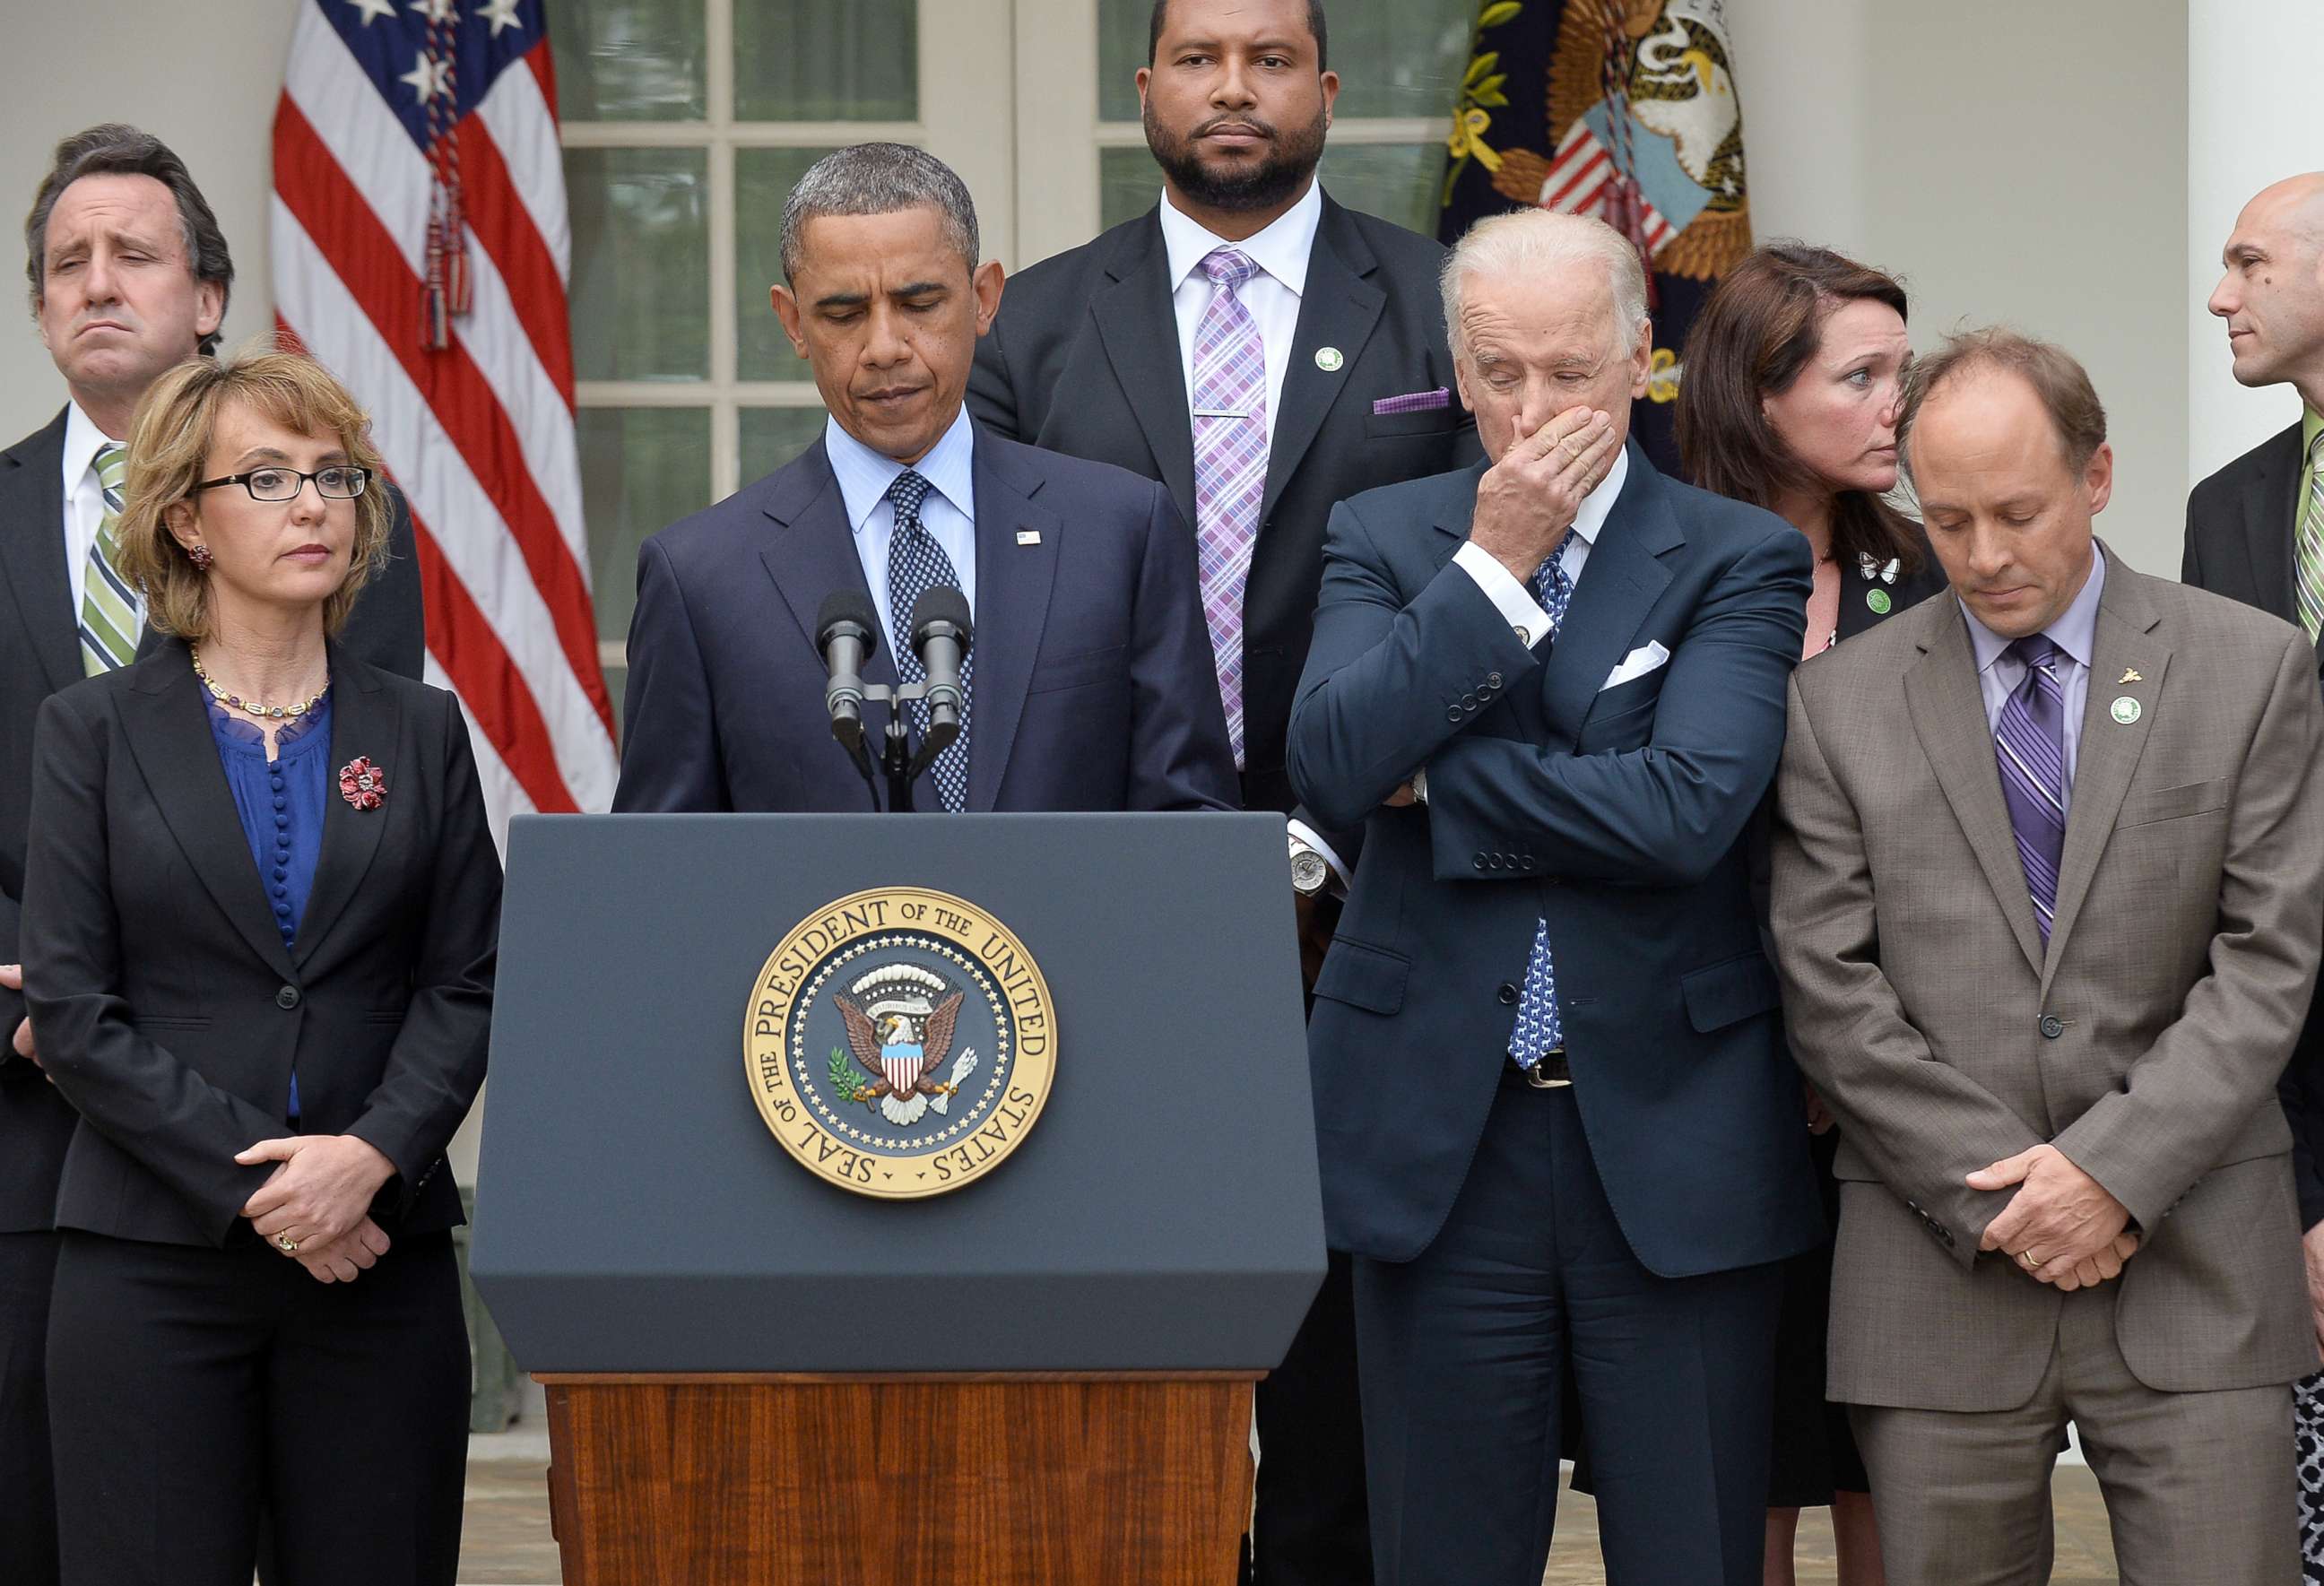 PHOTO: President Barack Obama is accompanied by former lawmaker Gabrielle Giffords, vice president Joe Biden and family members of Newtown school shooting victims as he speaks on gun control at the Rose Garden of the White House in Washington.